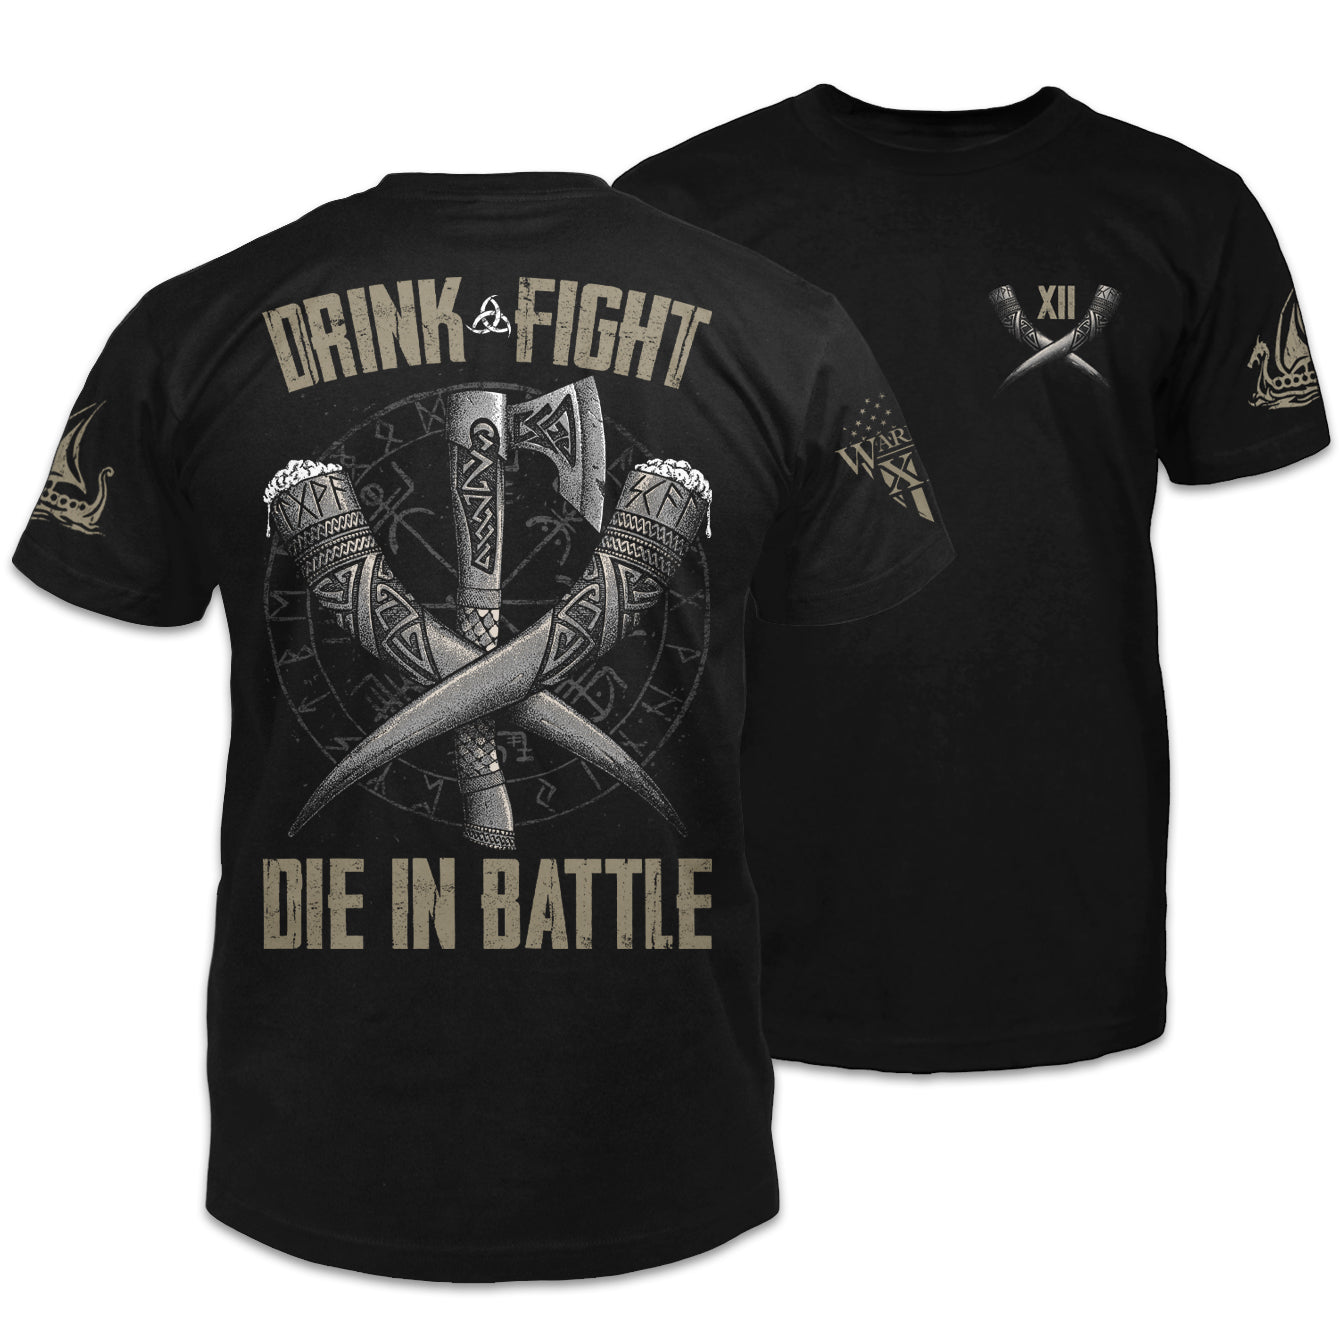 Front and back black t-shirt with the words "Drink, fight, die in battle." with mediaeval printed tusks on the shirt.